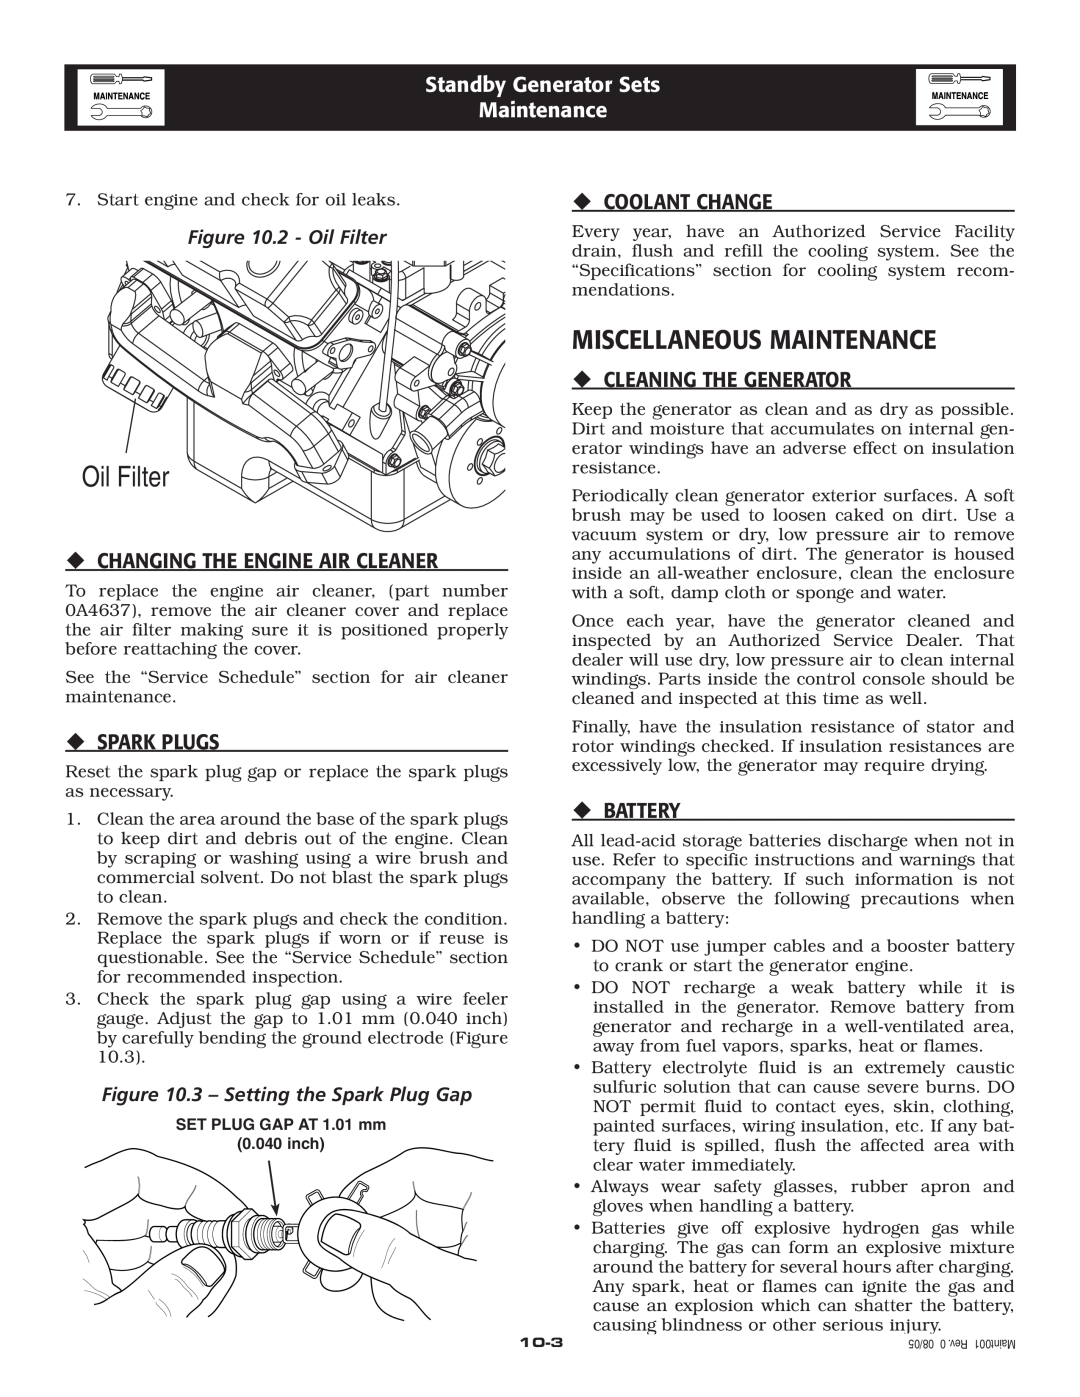 Generac Power Systems 005220-0 Miscellaneous Maintenance, ‹Changing The Engine Air Cleaner, ‹Spark Plugs, ‹Coolant Change 